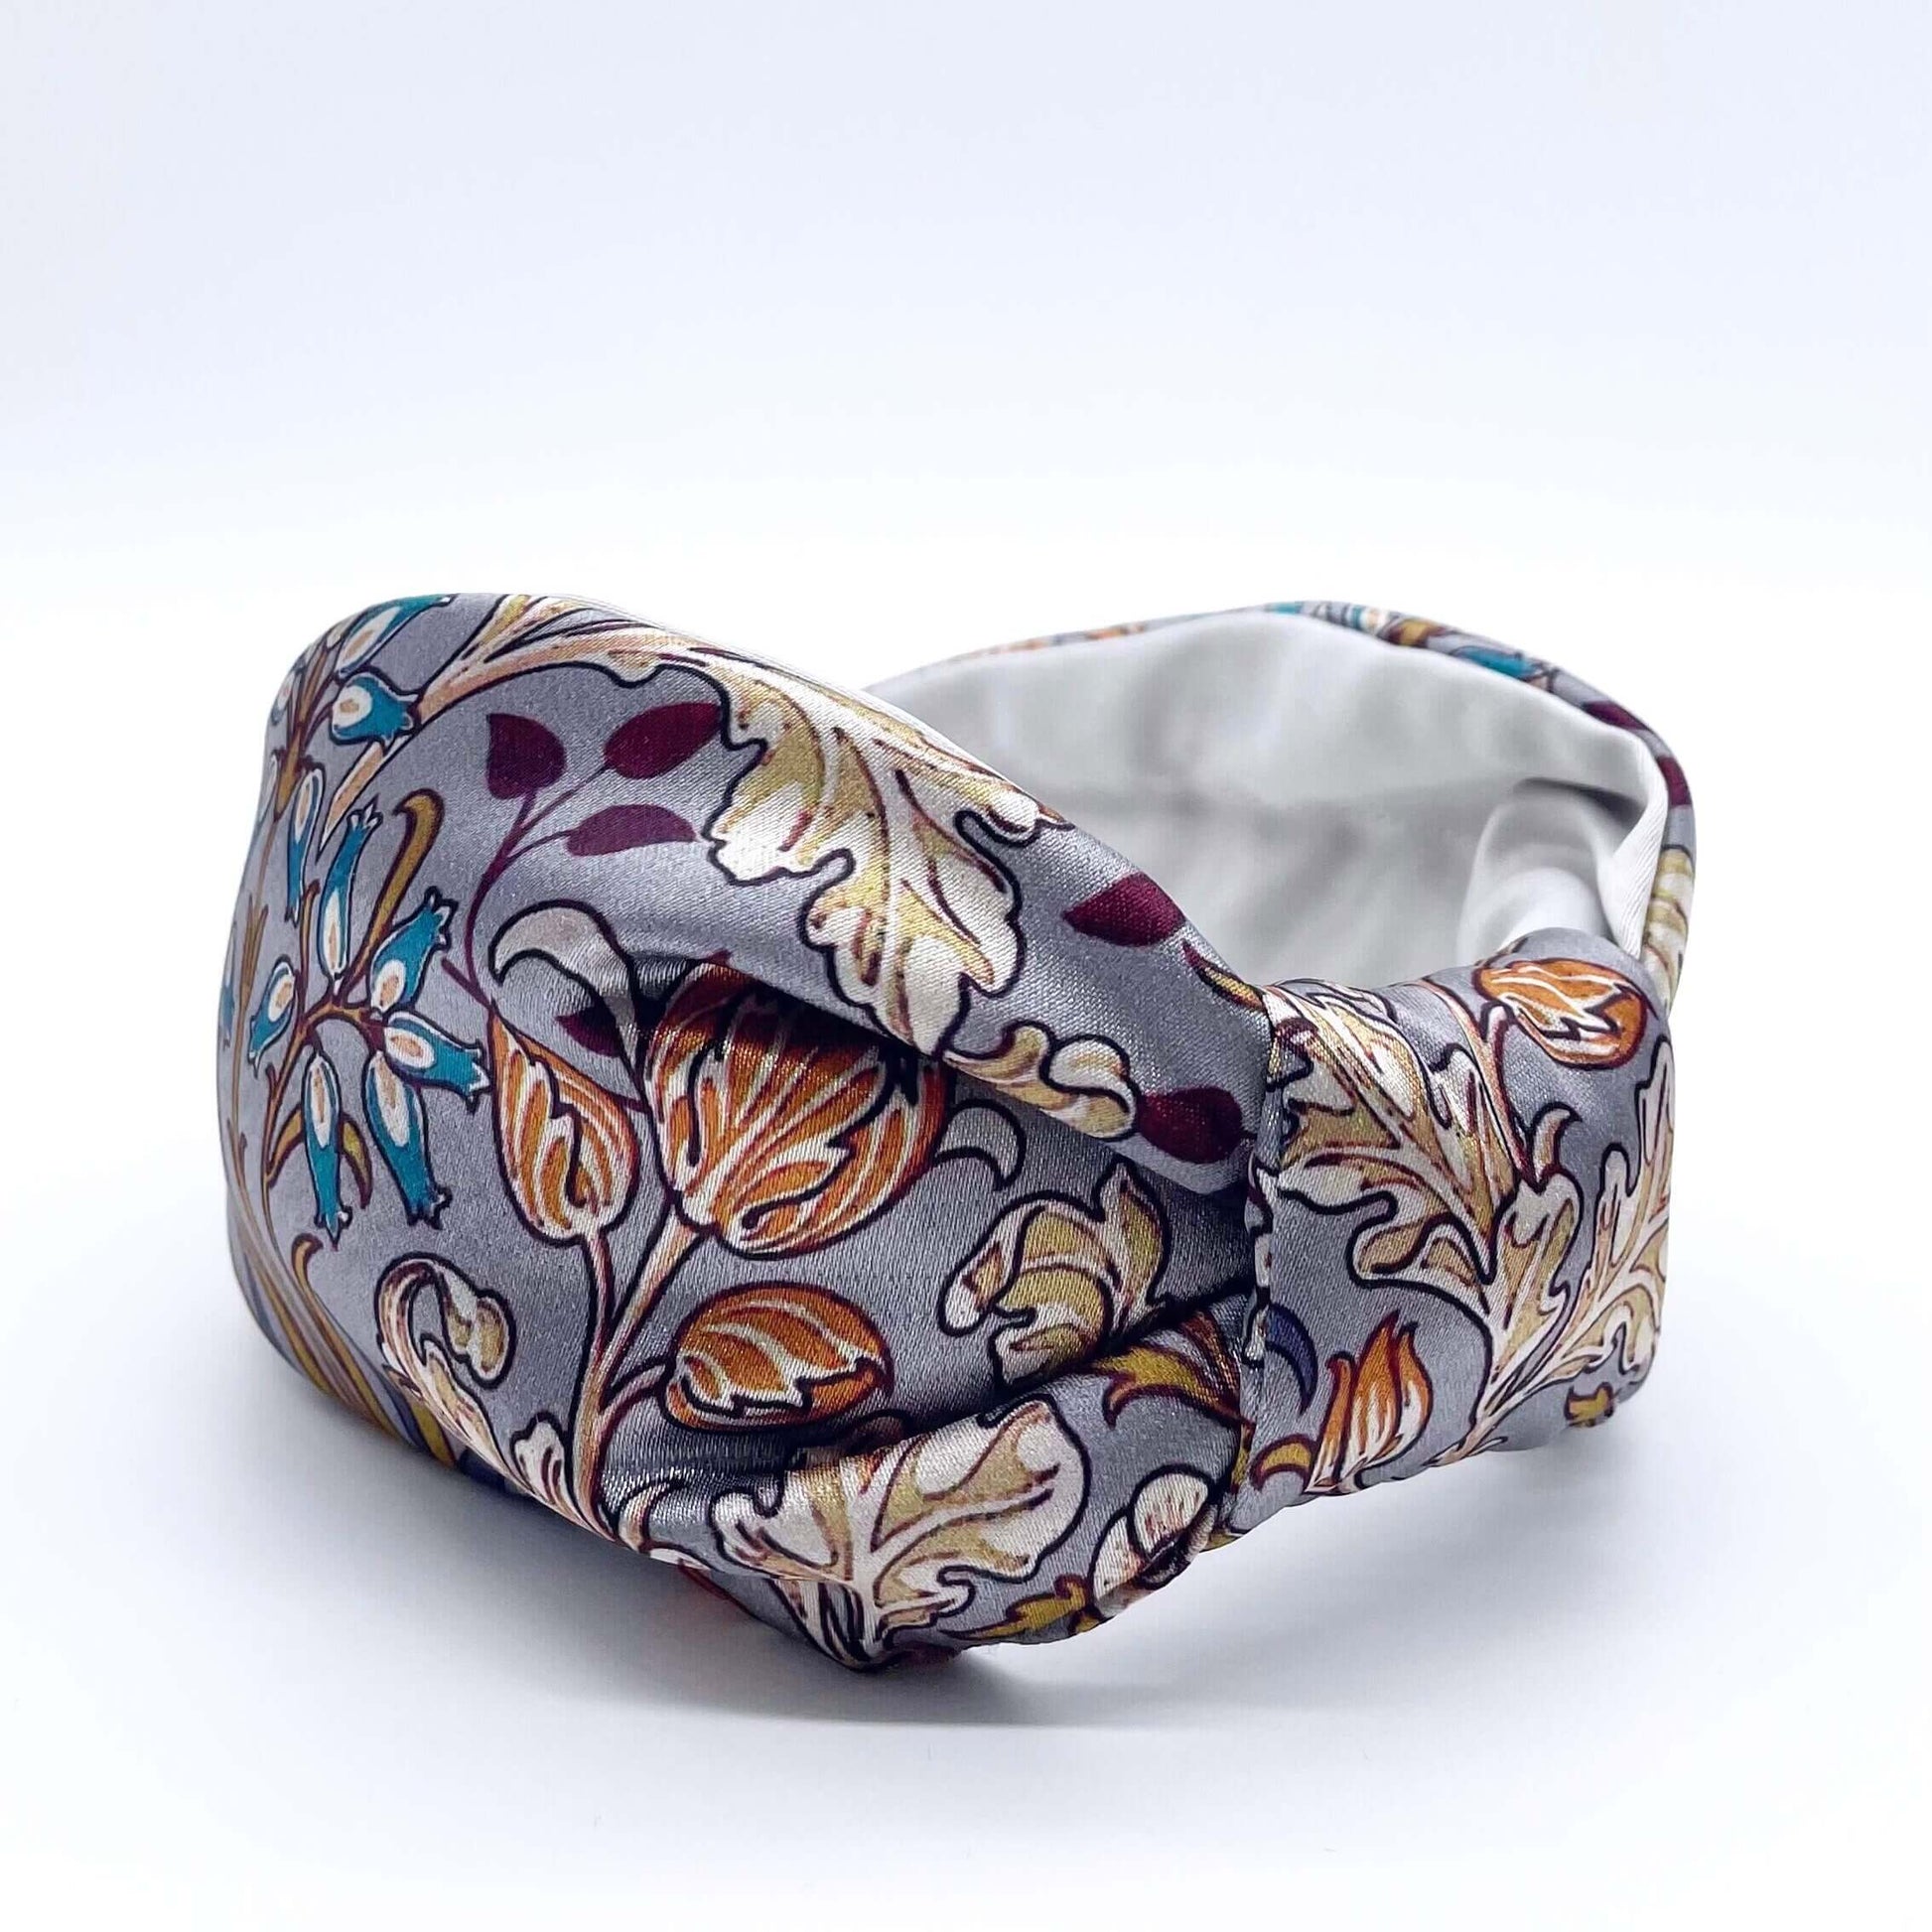 A beautiful grey, William Morris-inspired, patterned knot headband.